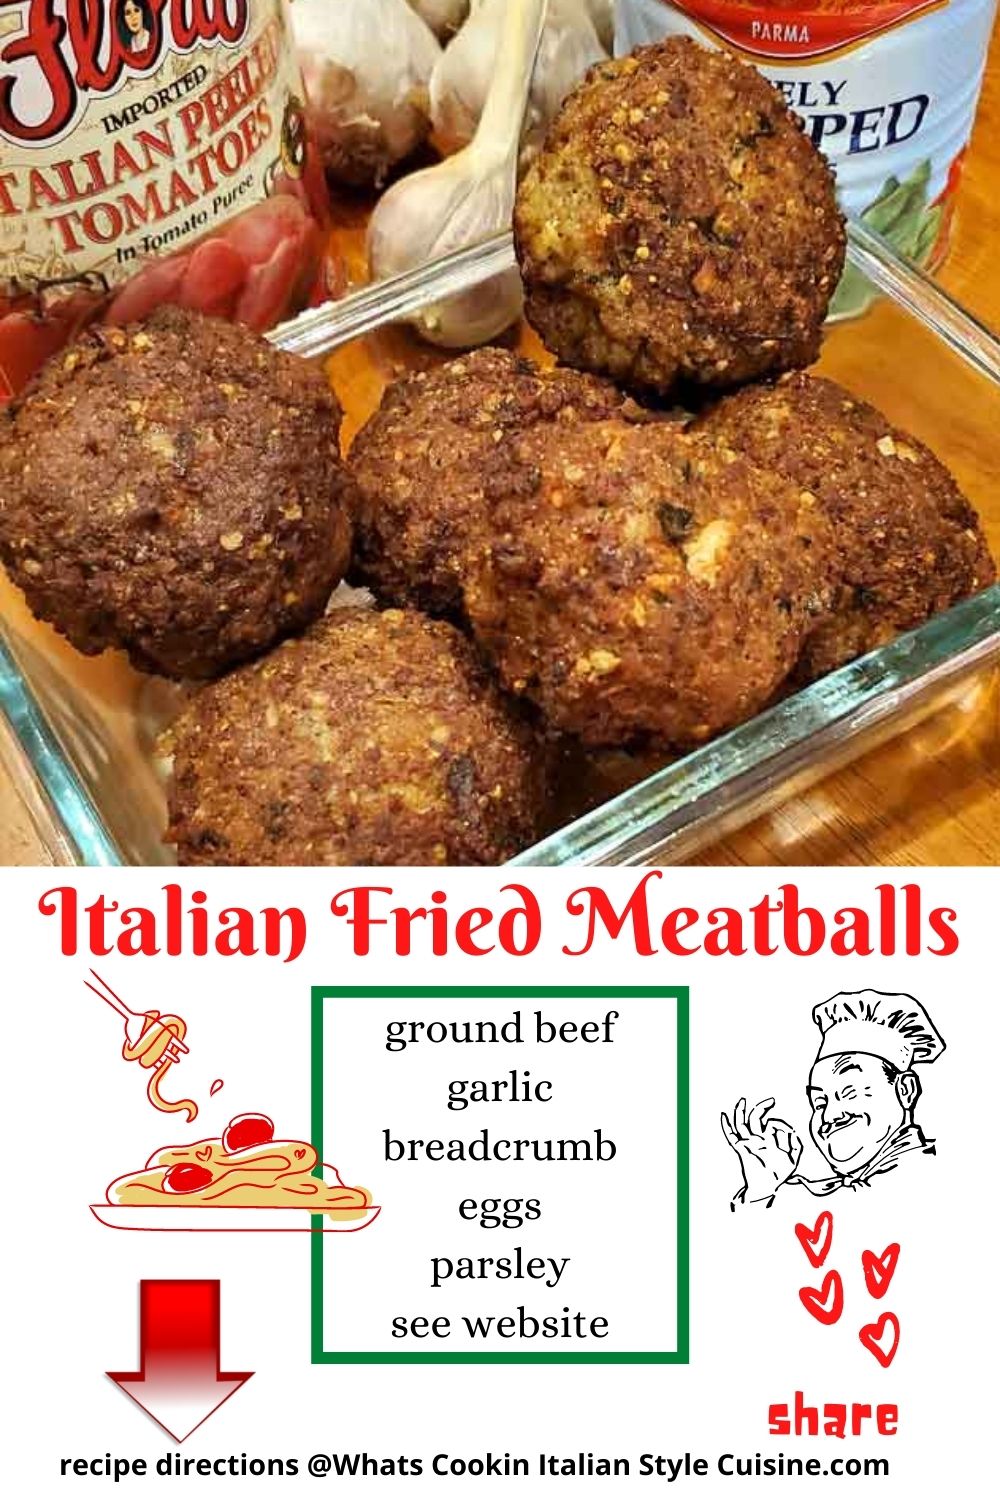 pin for later meatballs fried itaian style in a plate and how to make them